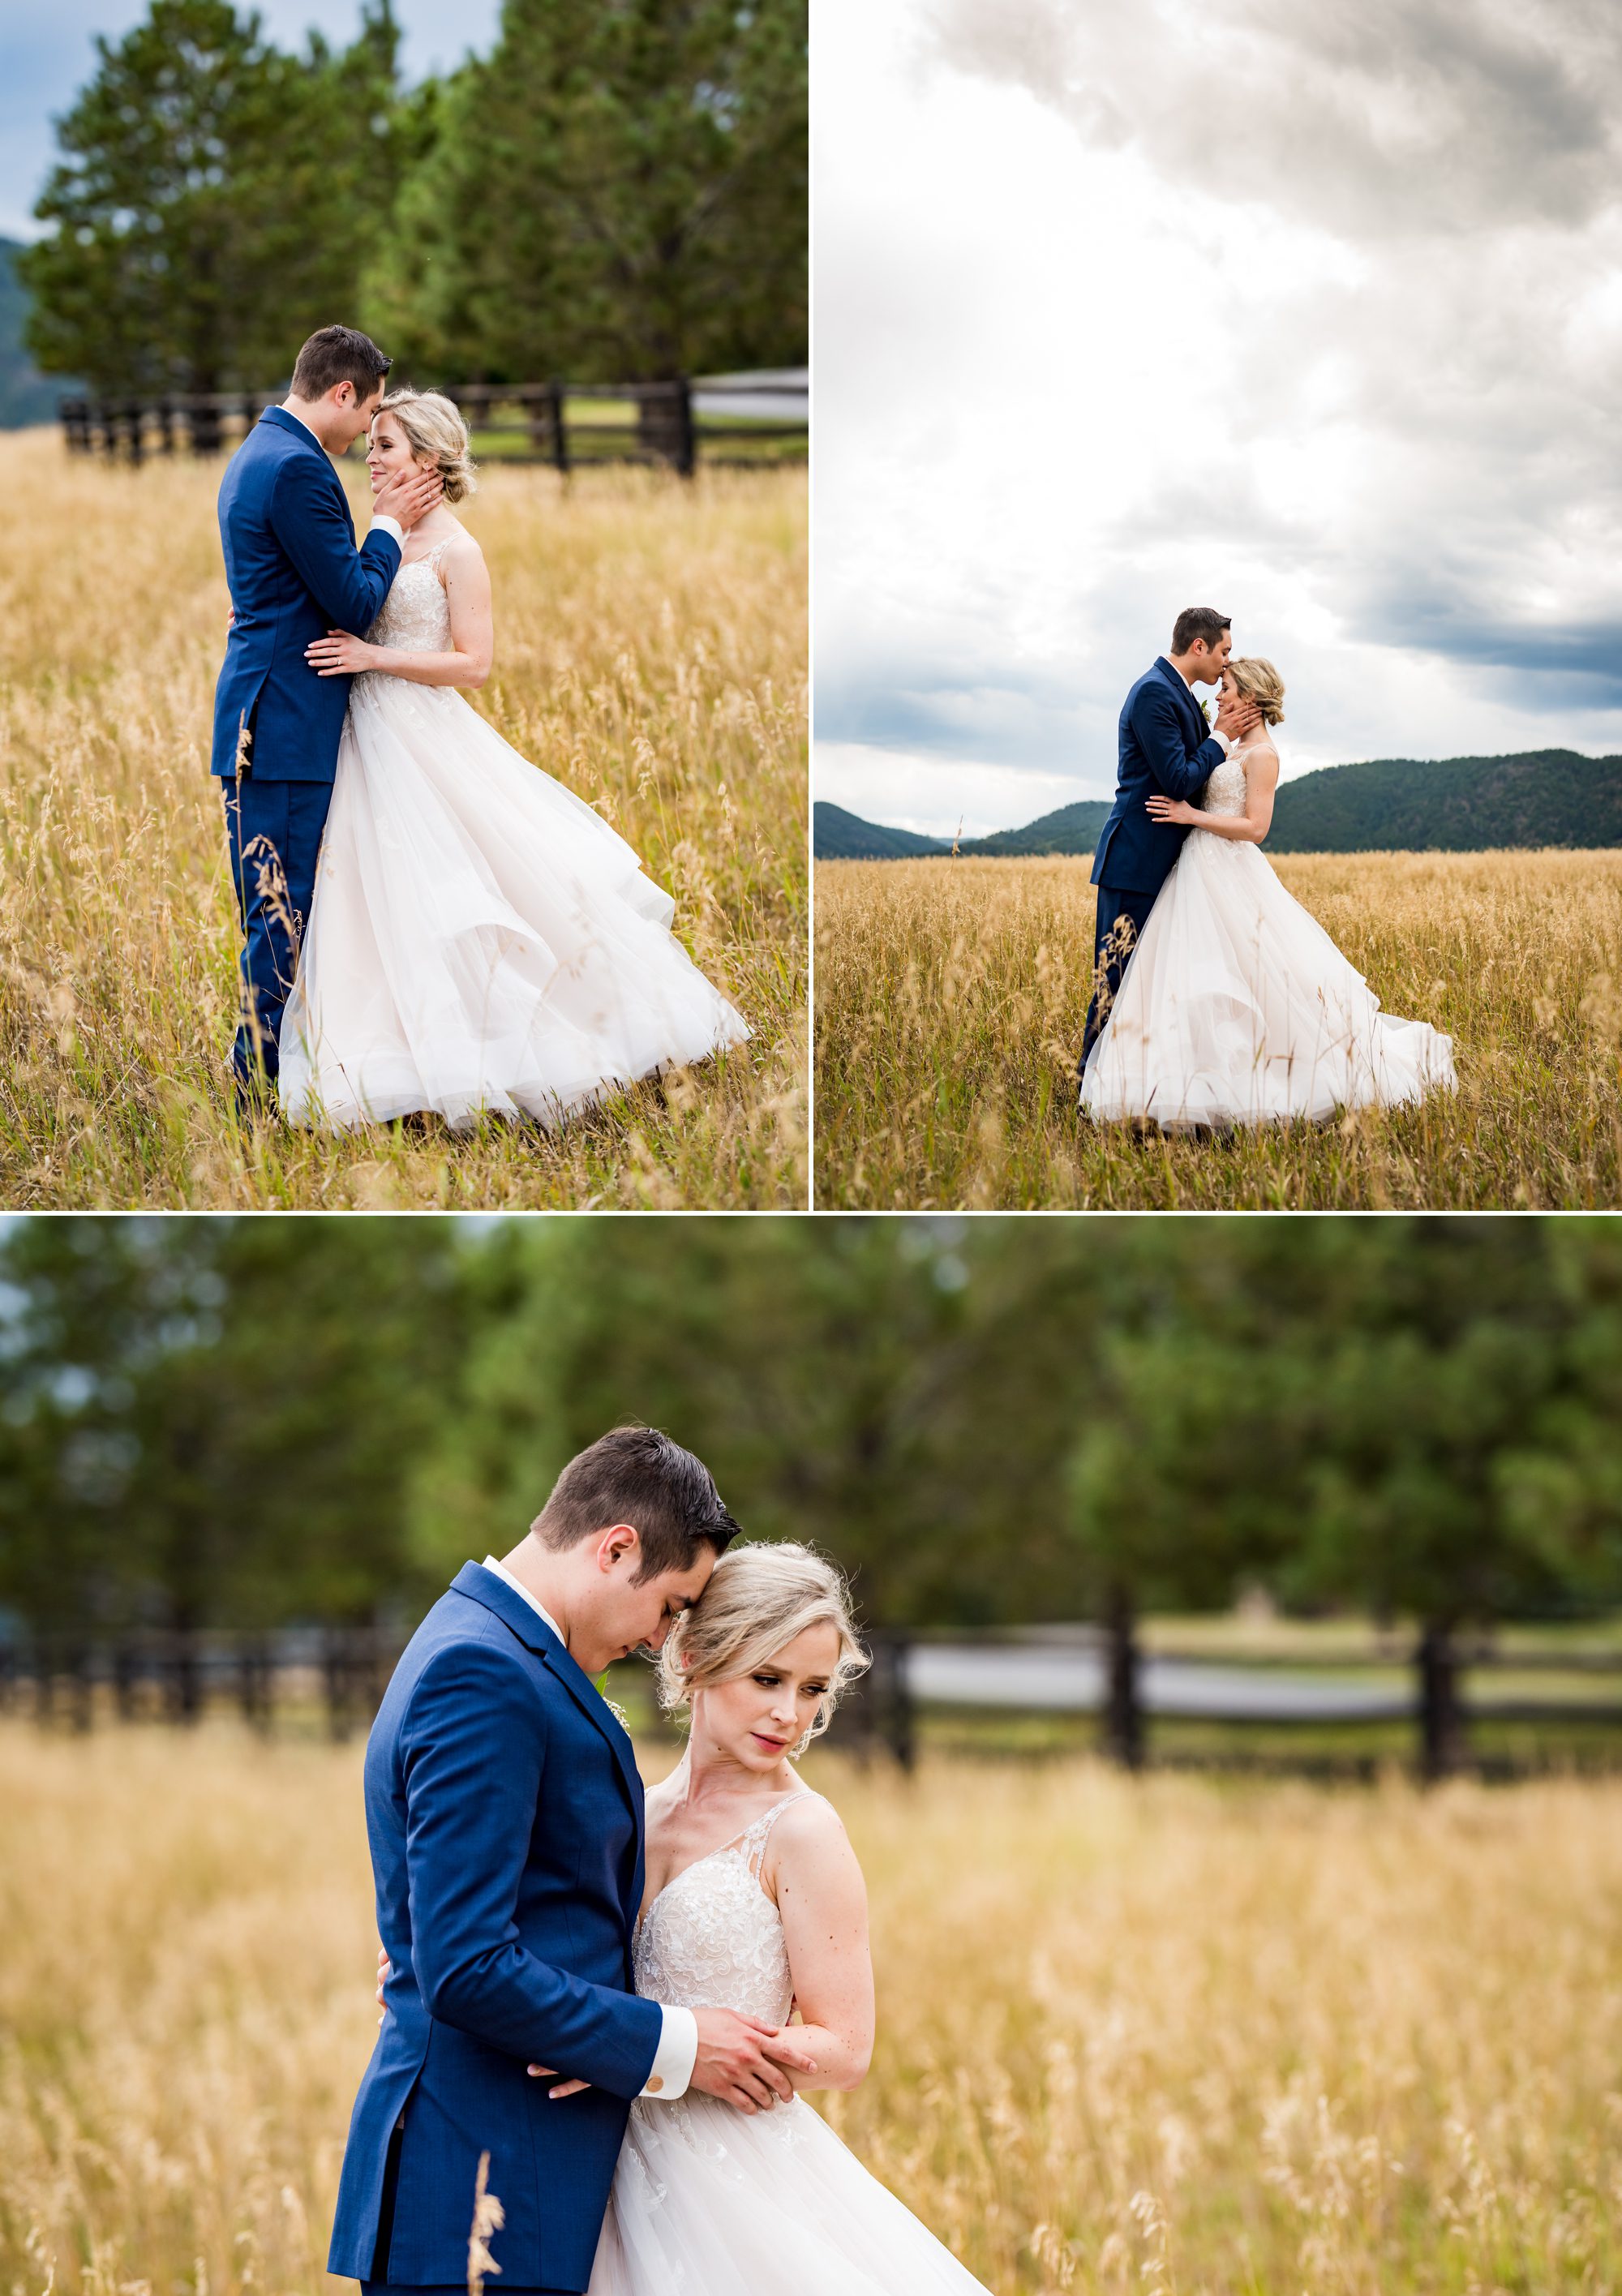 beautiful wedding couple in a field with Colorado mountains in the background